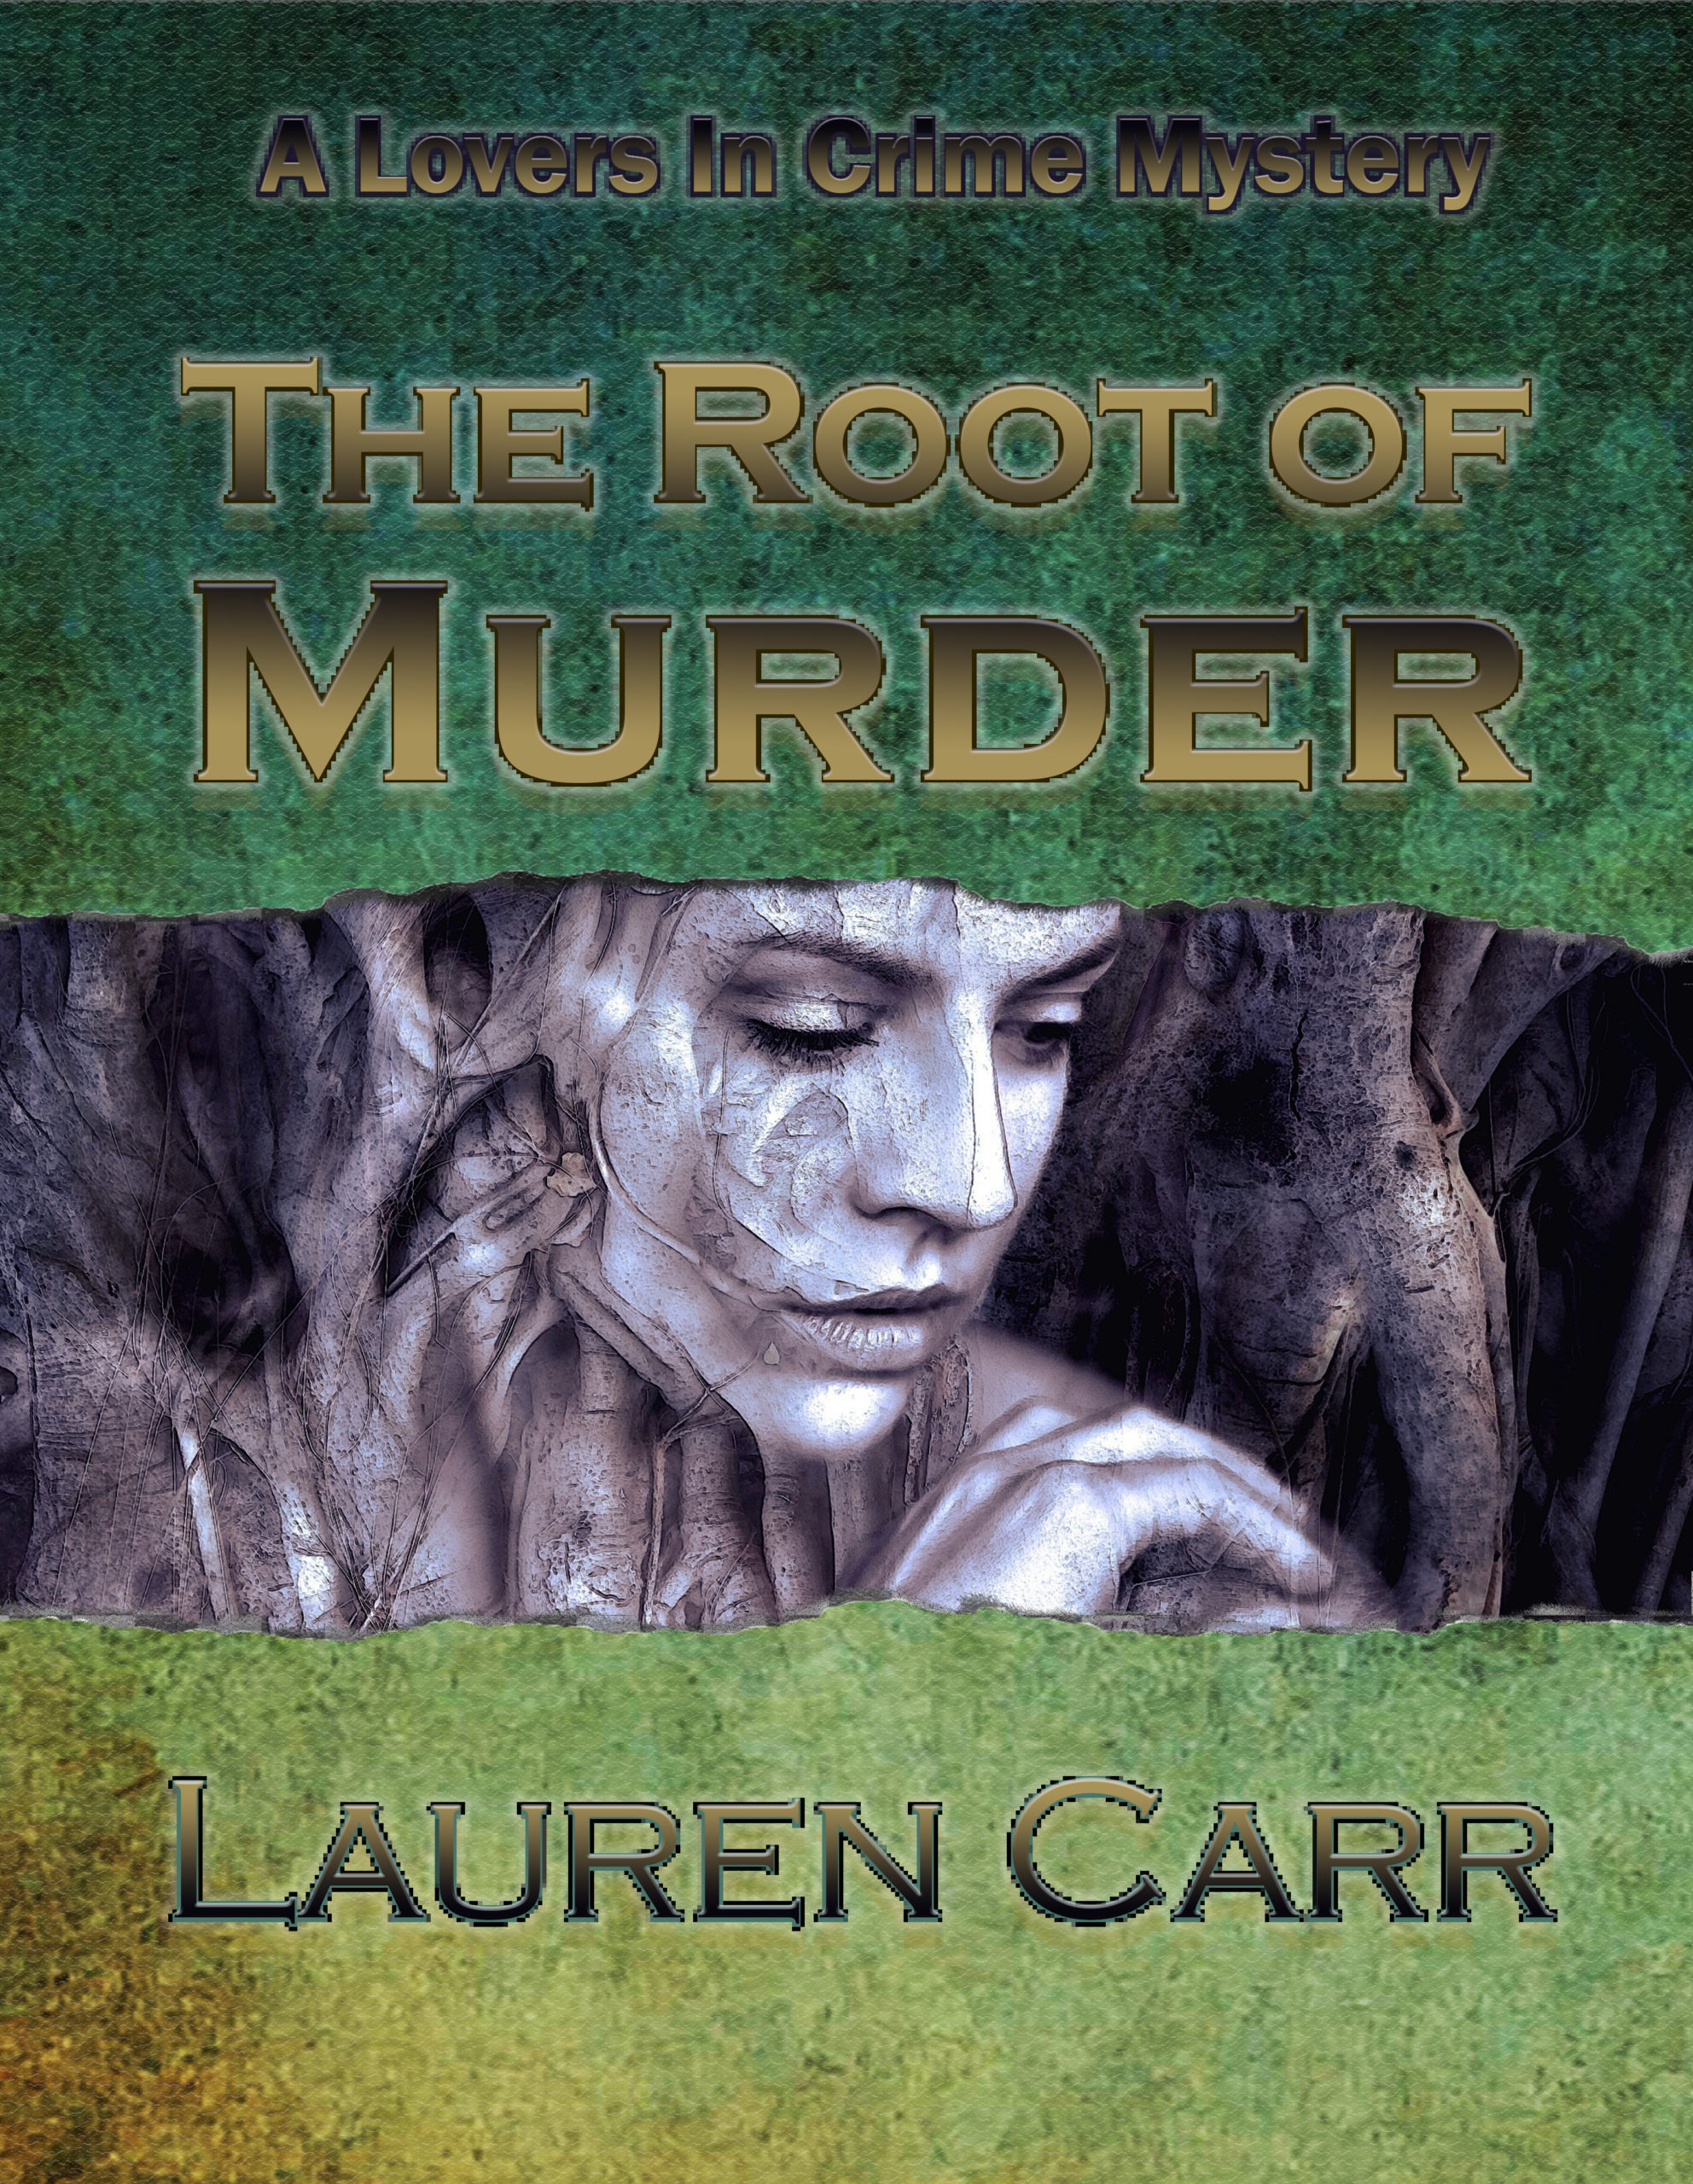 Review & Giveaway: The Root of Murder by Lauren Carr